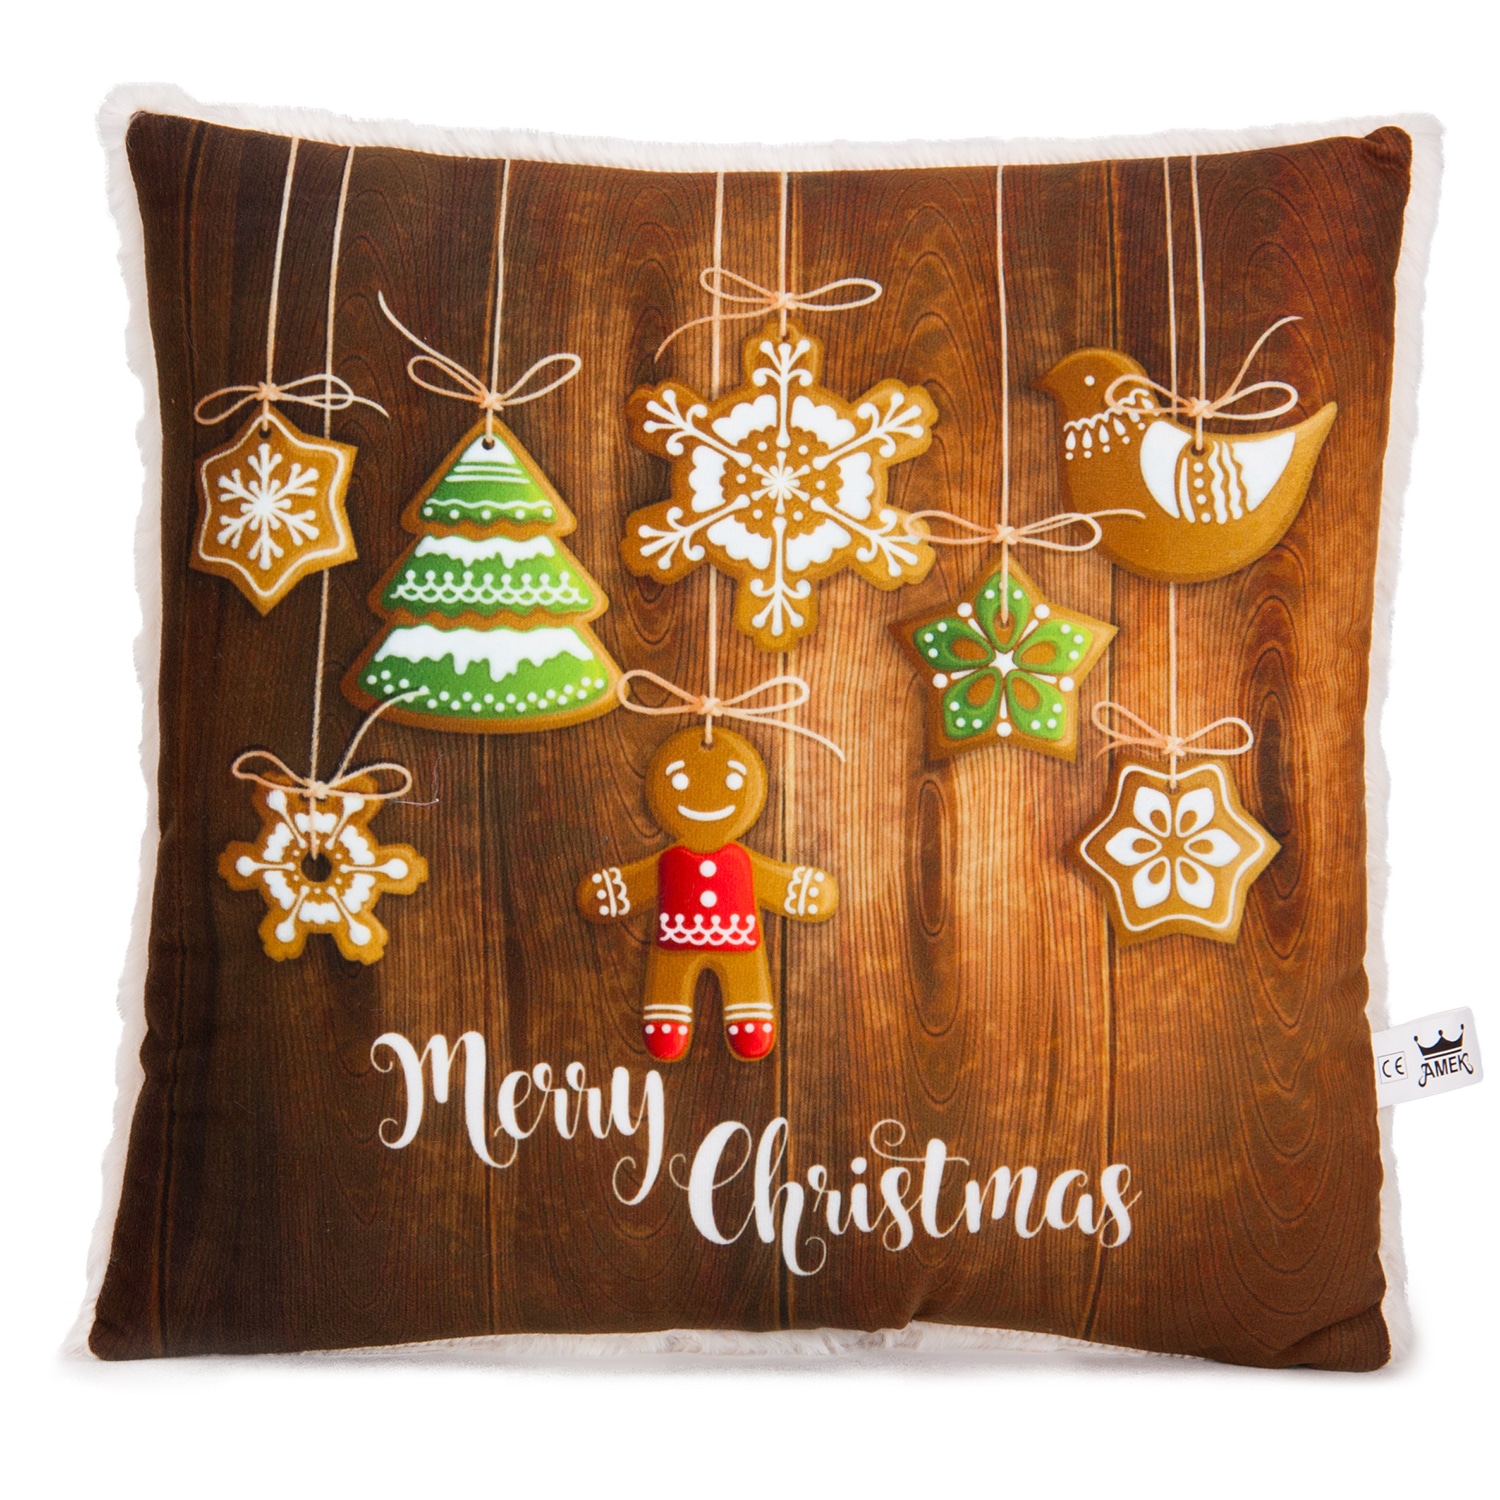 Christmas pillow with cookies